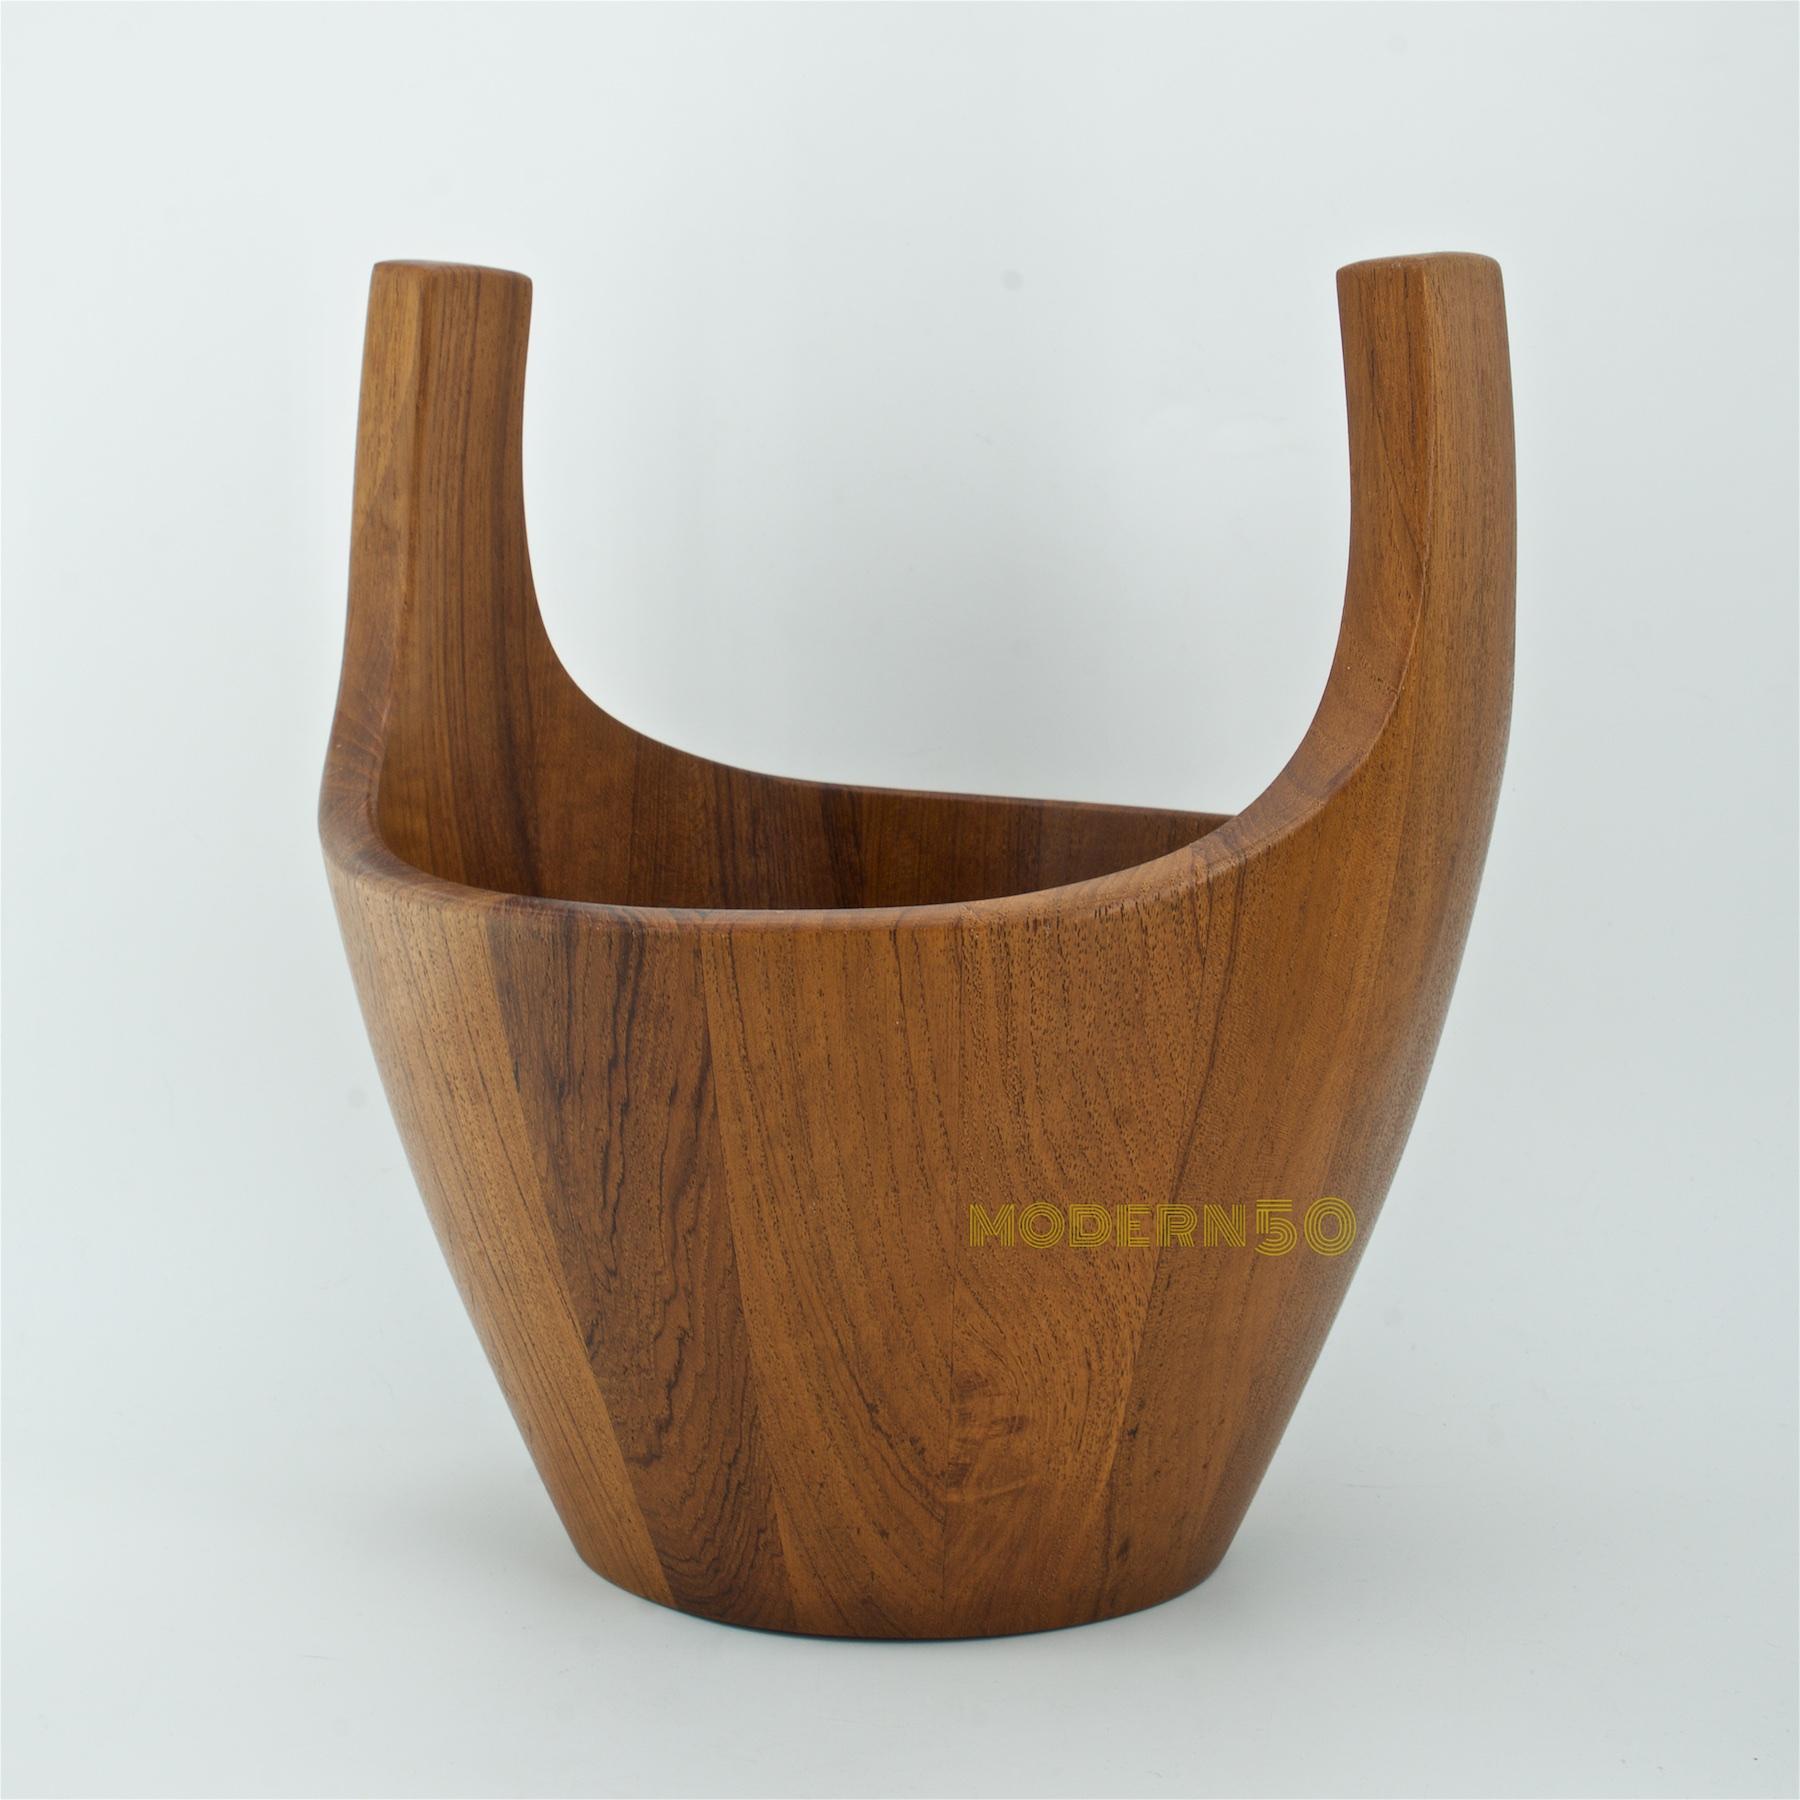 Denmark, circa 1950s. Staved teak bowl designed by Jens Quistgaard for Dansk. A midcentury re-interpretation of the traditional wooden Quaich. Measures: 10 5/8 inches high, 10 inches wide, 9 1/2 inches deep. Branded mark on underside, three duck